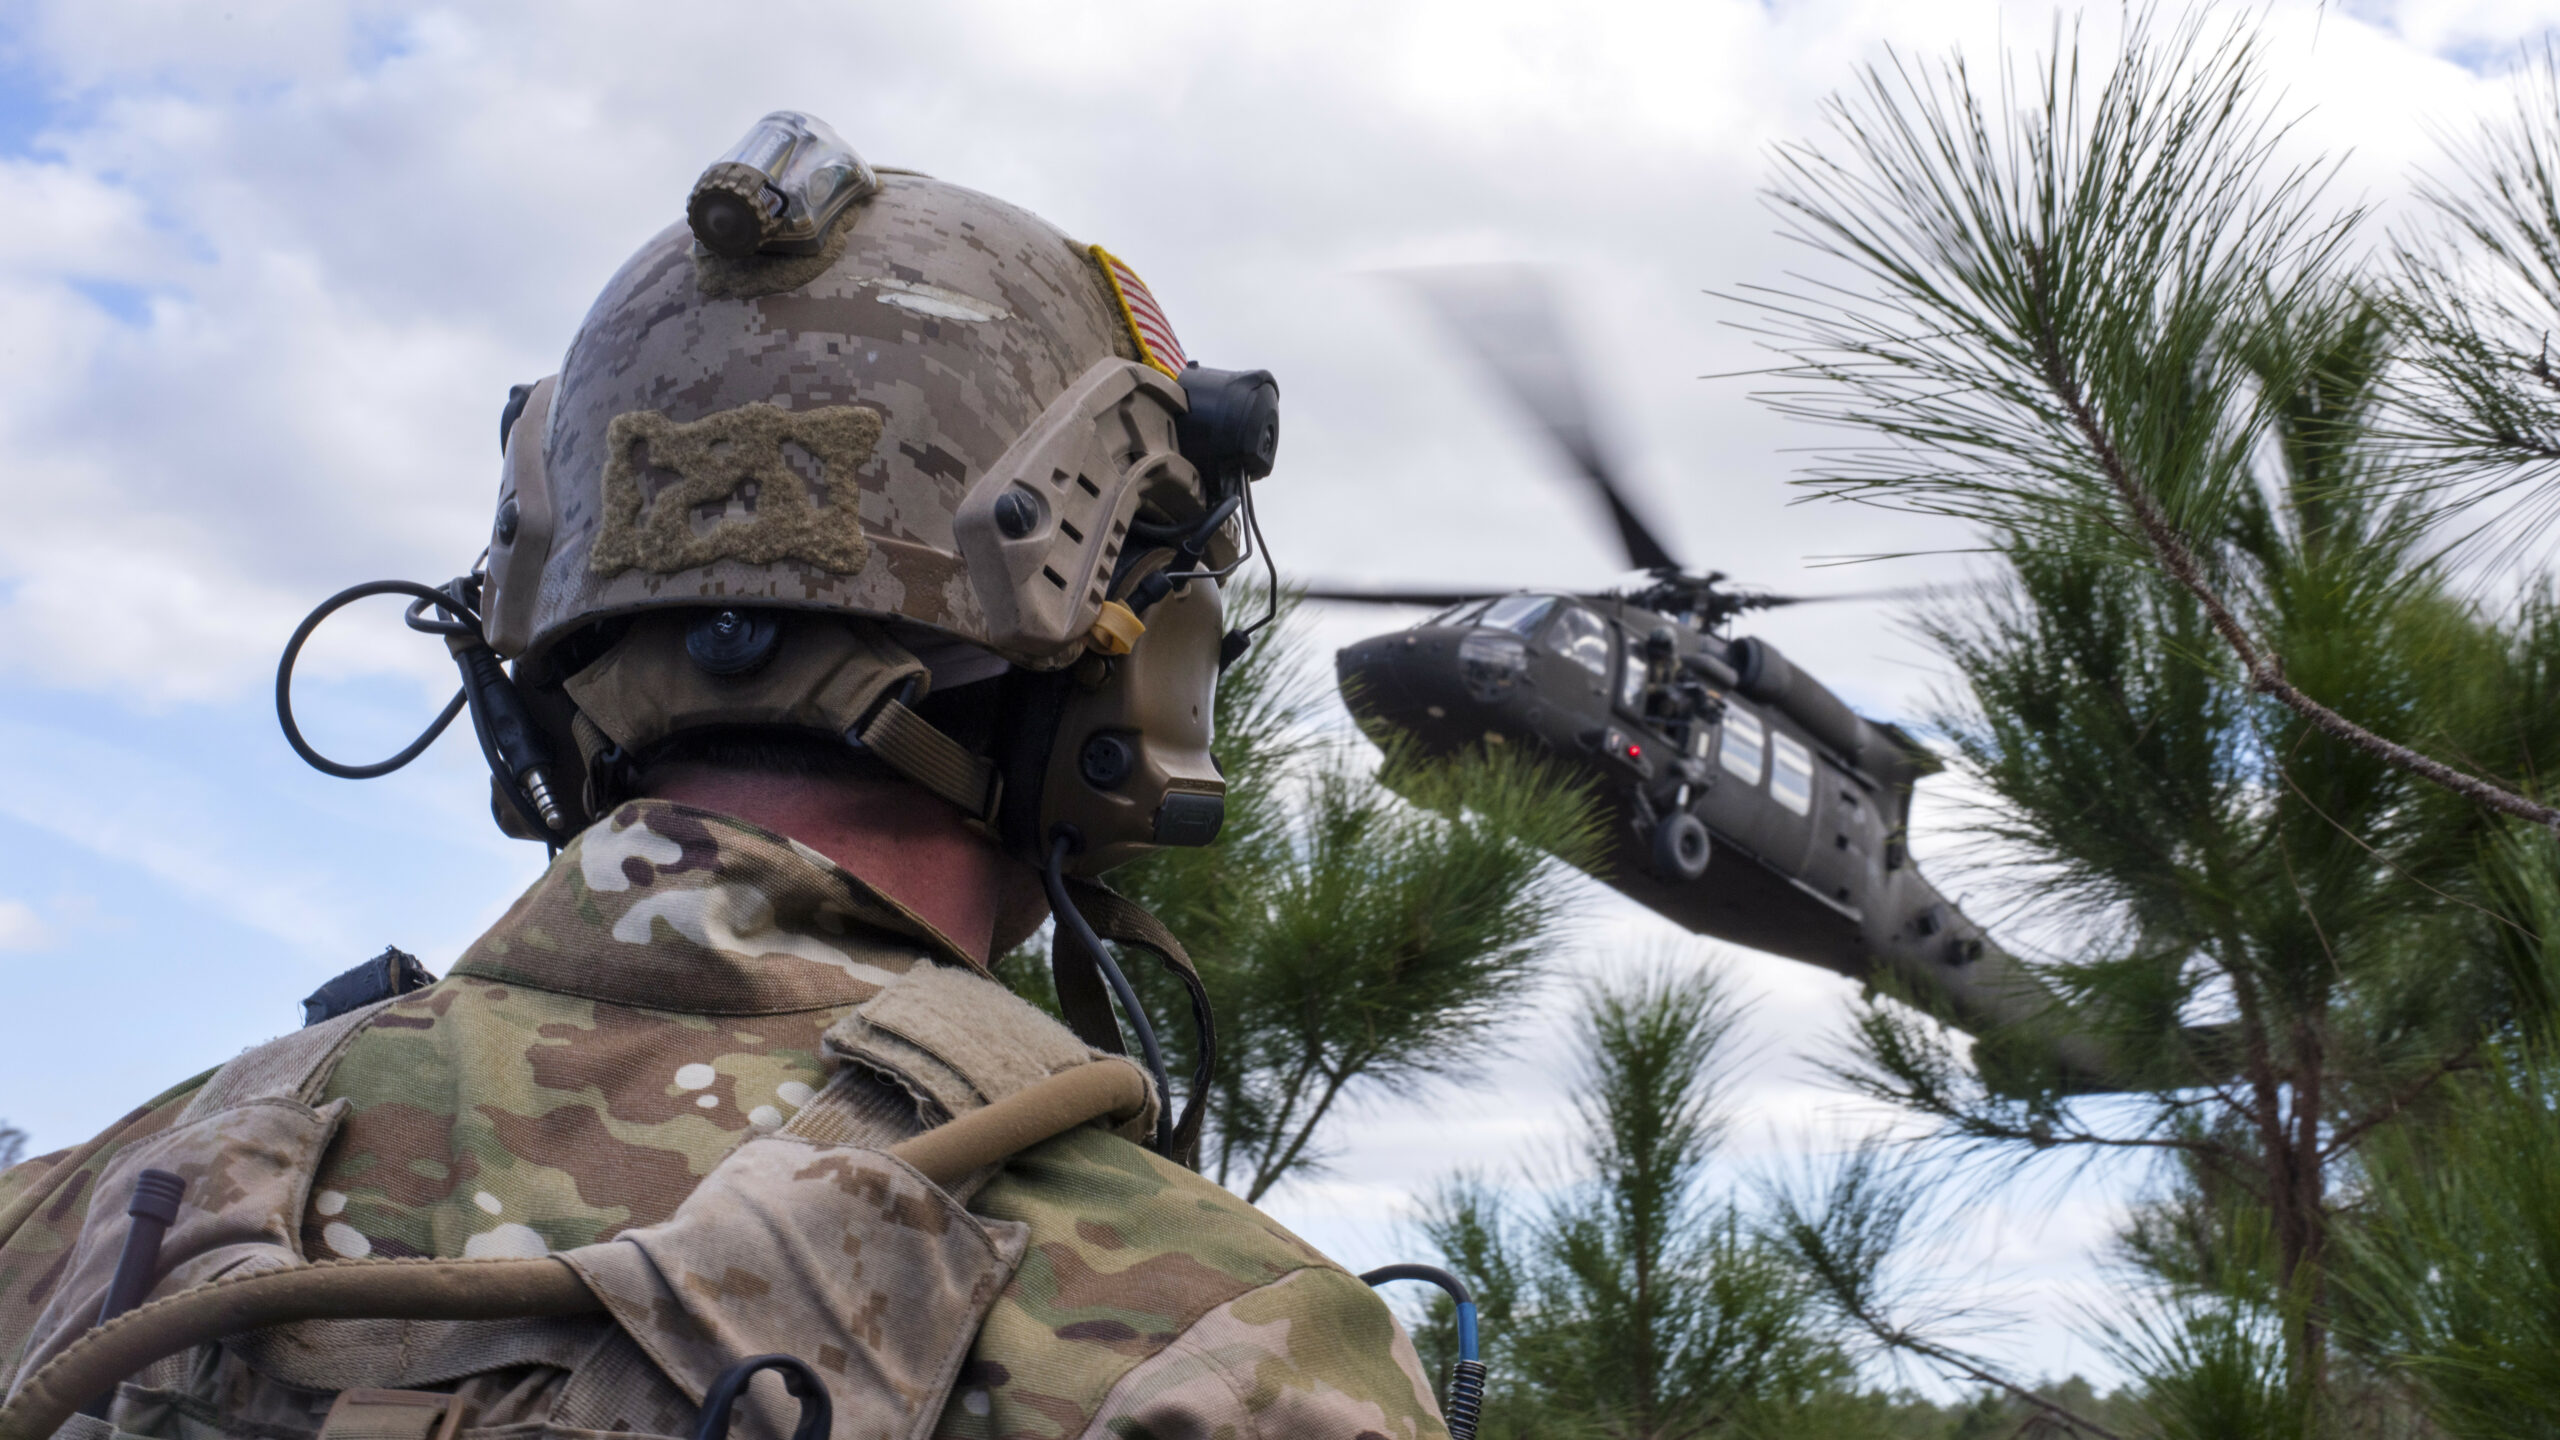 A US Navy SEAL team member awaits extraction from a UH-60 Black Hawk helicopter during an 2019 exercise